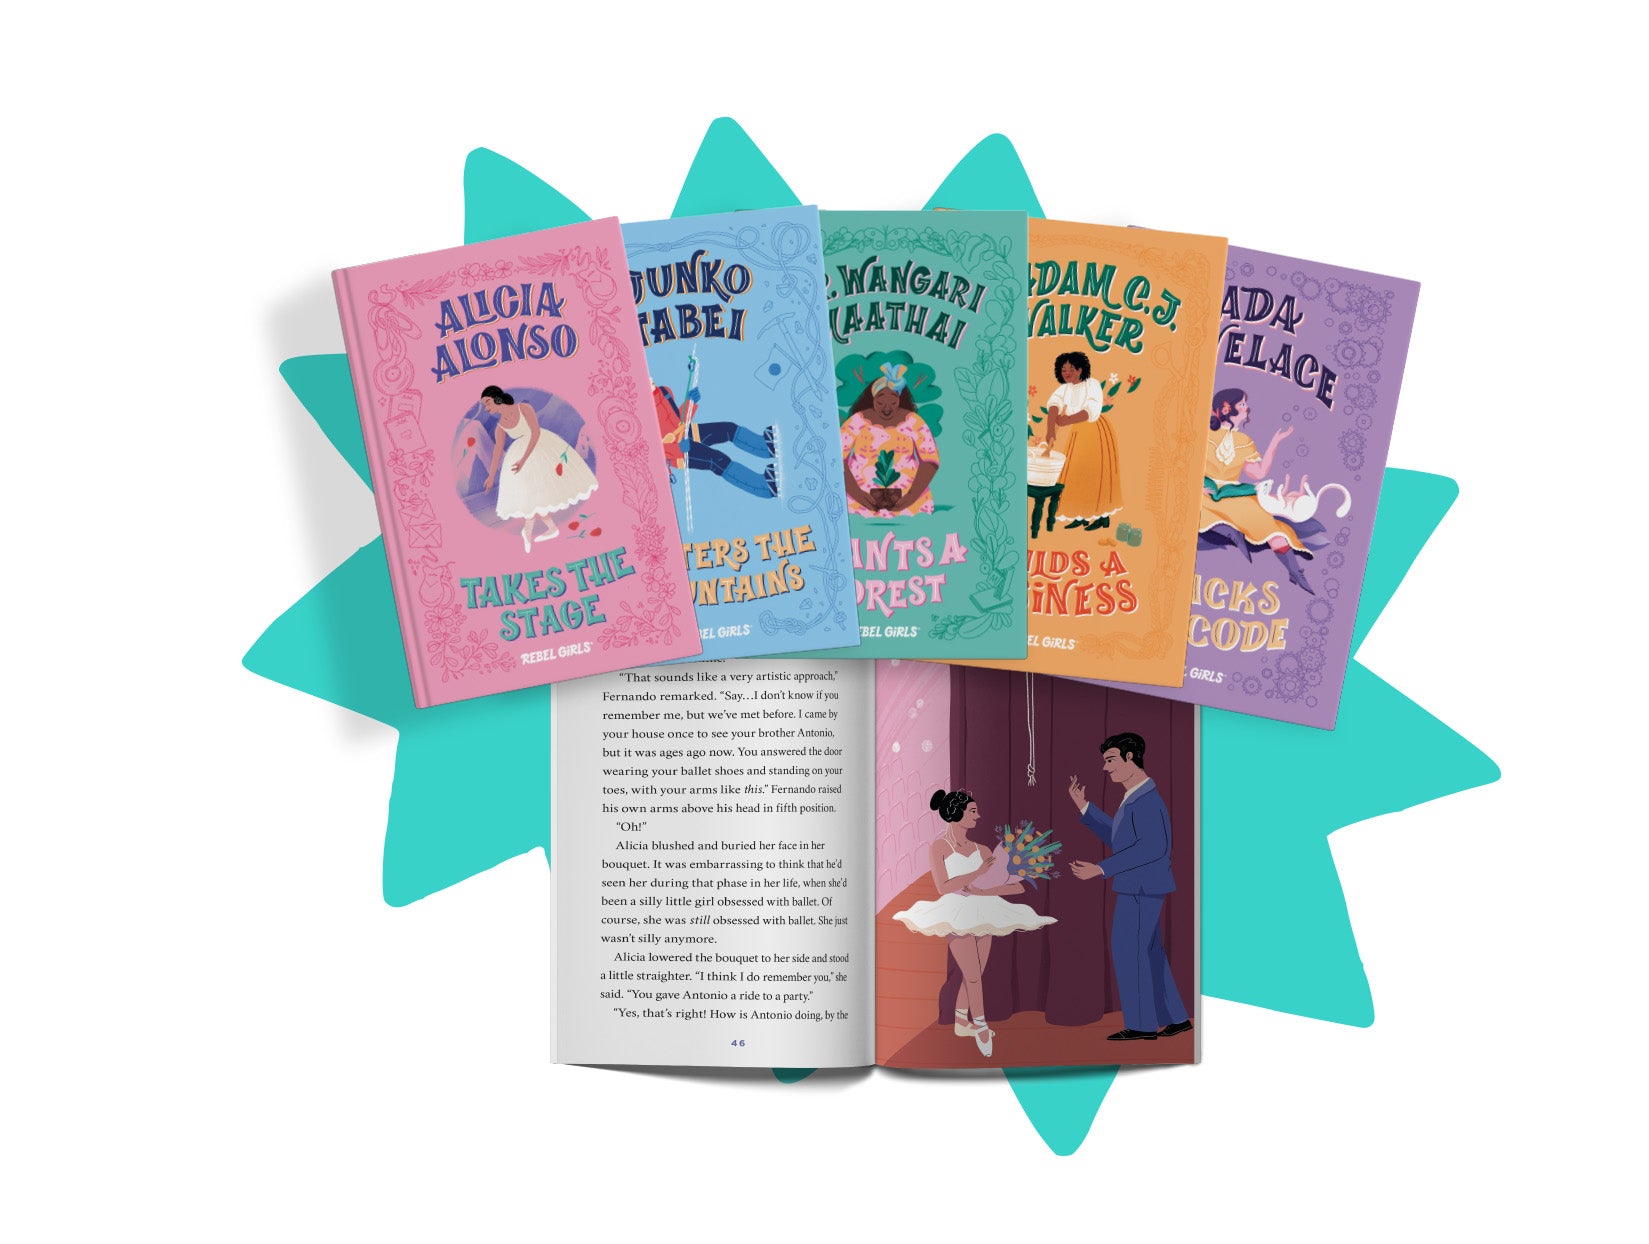 <p>From the creators of the bestselling Good Night Stories for Rebel Girls series comes an irresistible collection of five chapter books about the real lives of five extraordinary women throughout history.</p>
<p>This gorgeous hardcover boxed set is the perfect gift to inspire any young reader. It contains five individual, historical fiction chapter books, each exploring the life and times of an extraordinary woman in global history.</p>
<p>Readers will meet Ada Lovelace — a nineteenth-century pioneer in computer science, Madam C. J. Walker — an early leader in the African American beauty industry, Dr. Wangari Maathai — an environmental warrior and Nobel Peace Prize winner from Kenya, Junko Tabei — a champion in mountaineering who became the first woman to summit Mount Everest, and Alicia Alonso — a prima ballerina and remarkable creator in the world of dance.</p>
<p>Each stunningly designed chapter book features at least ten full-color illustrations from a female artist, as well as bonus activities in the backmatter to encourage kids to explore the various fields in which each of these women thrived.</p>
